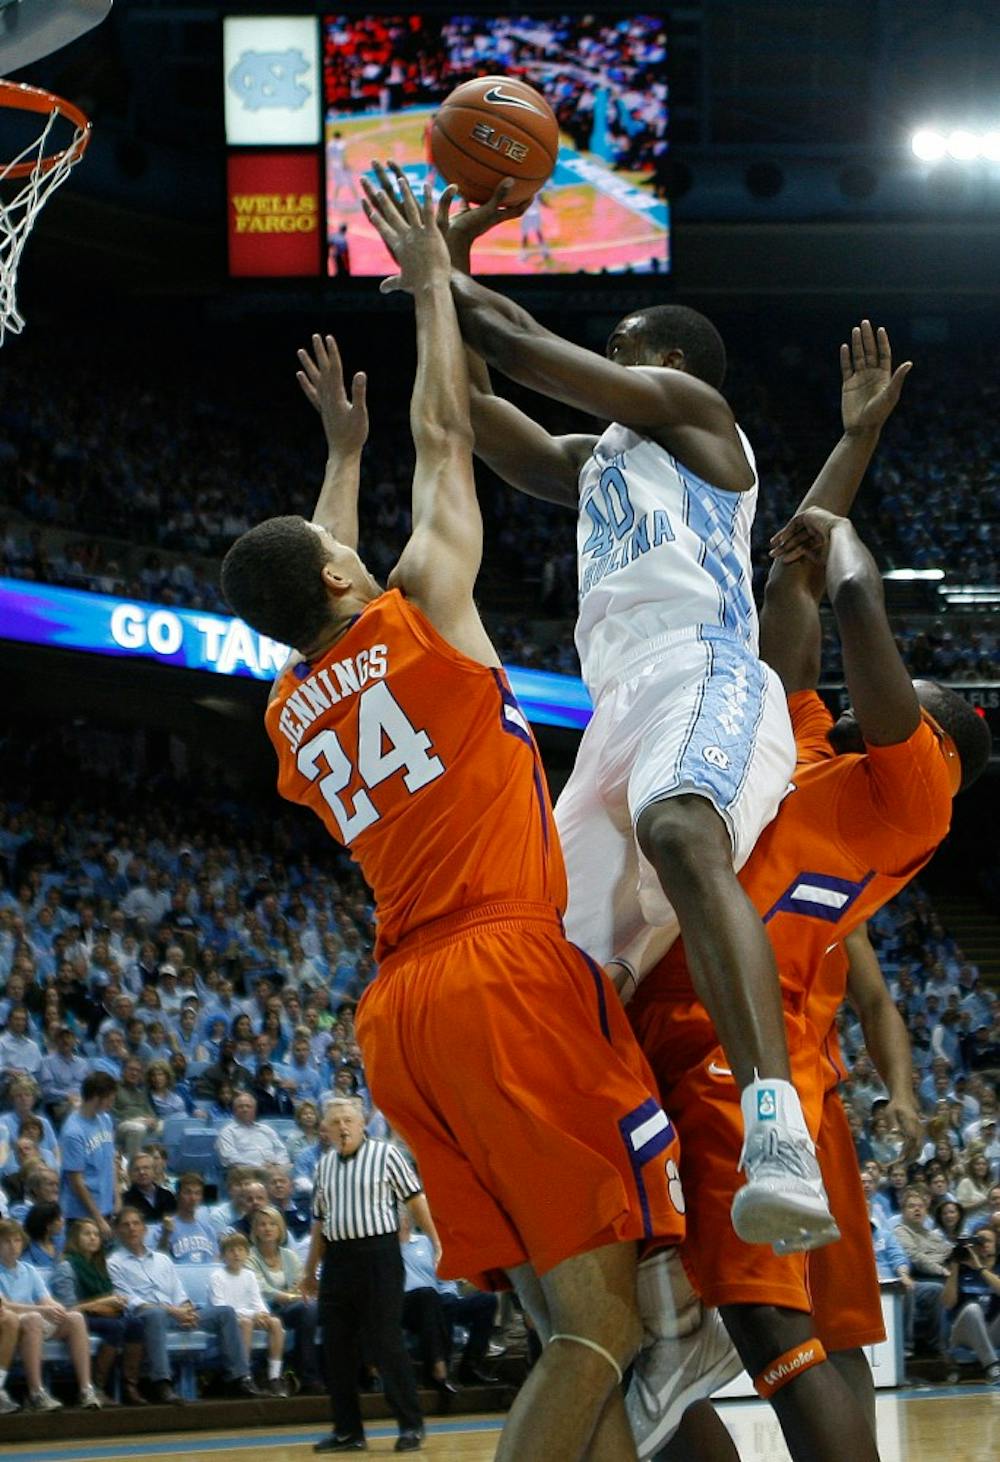 UNC guard Harrison Barnes takes the ball to the basket during the game against the Clemson Tigers on Saturday at the Smith Center. Barnes led the Tar Heels in scoring with 24 points in the 74-52 Carolina victory.